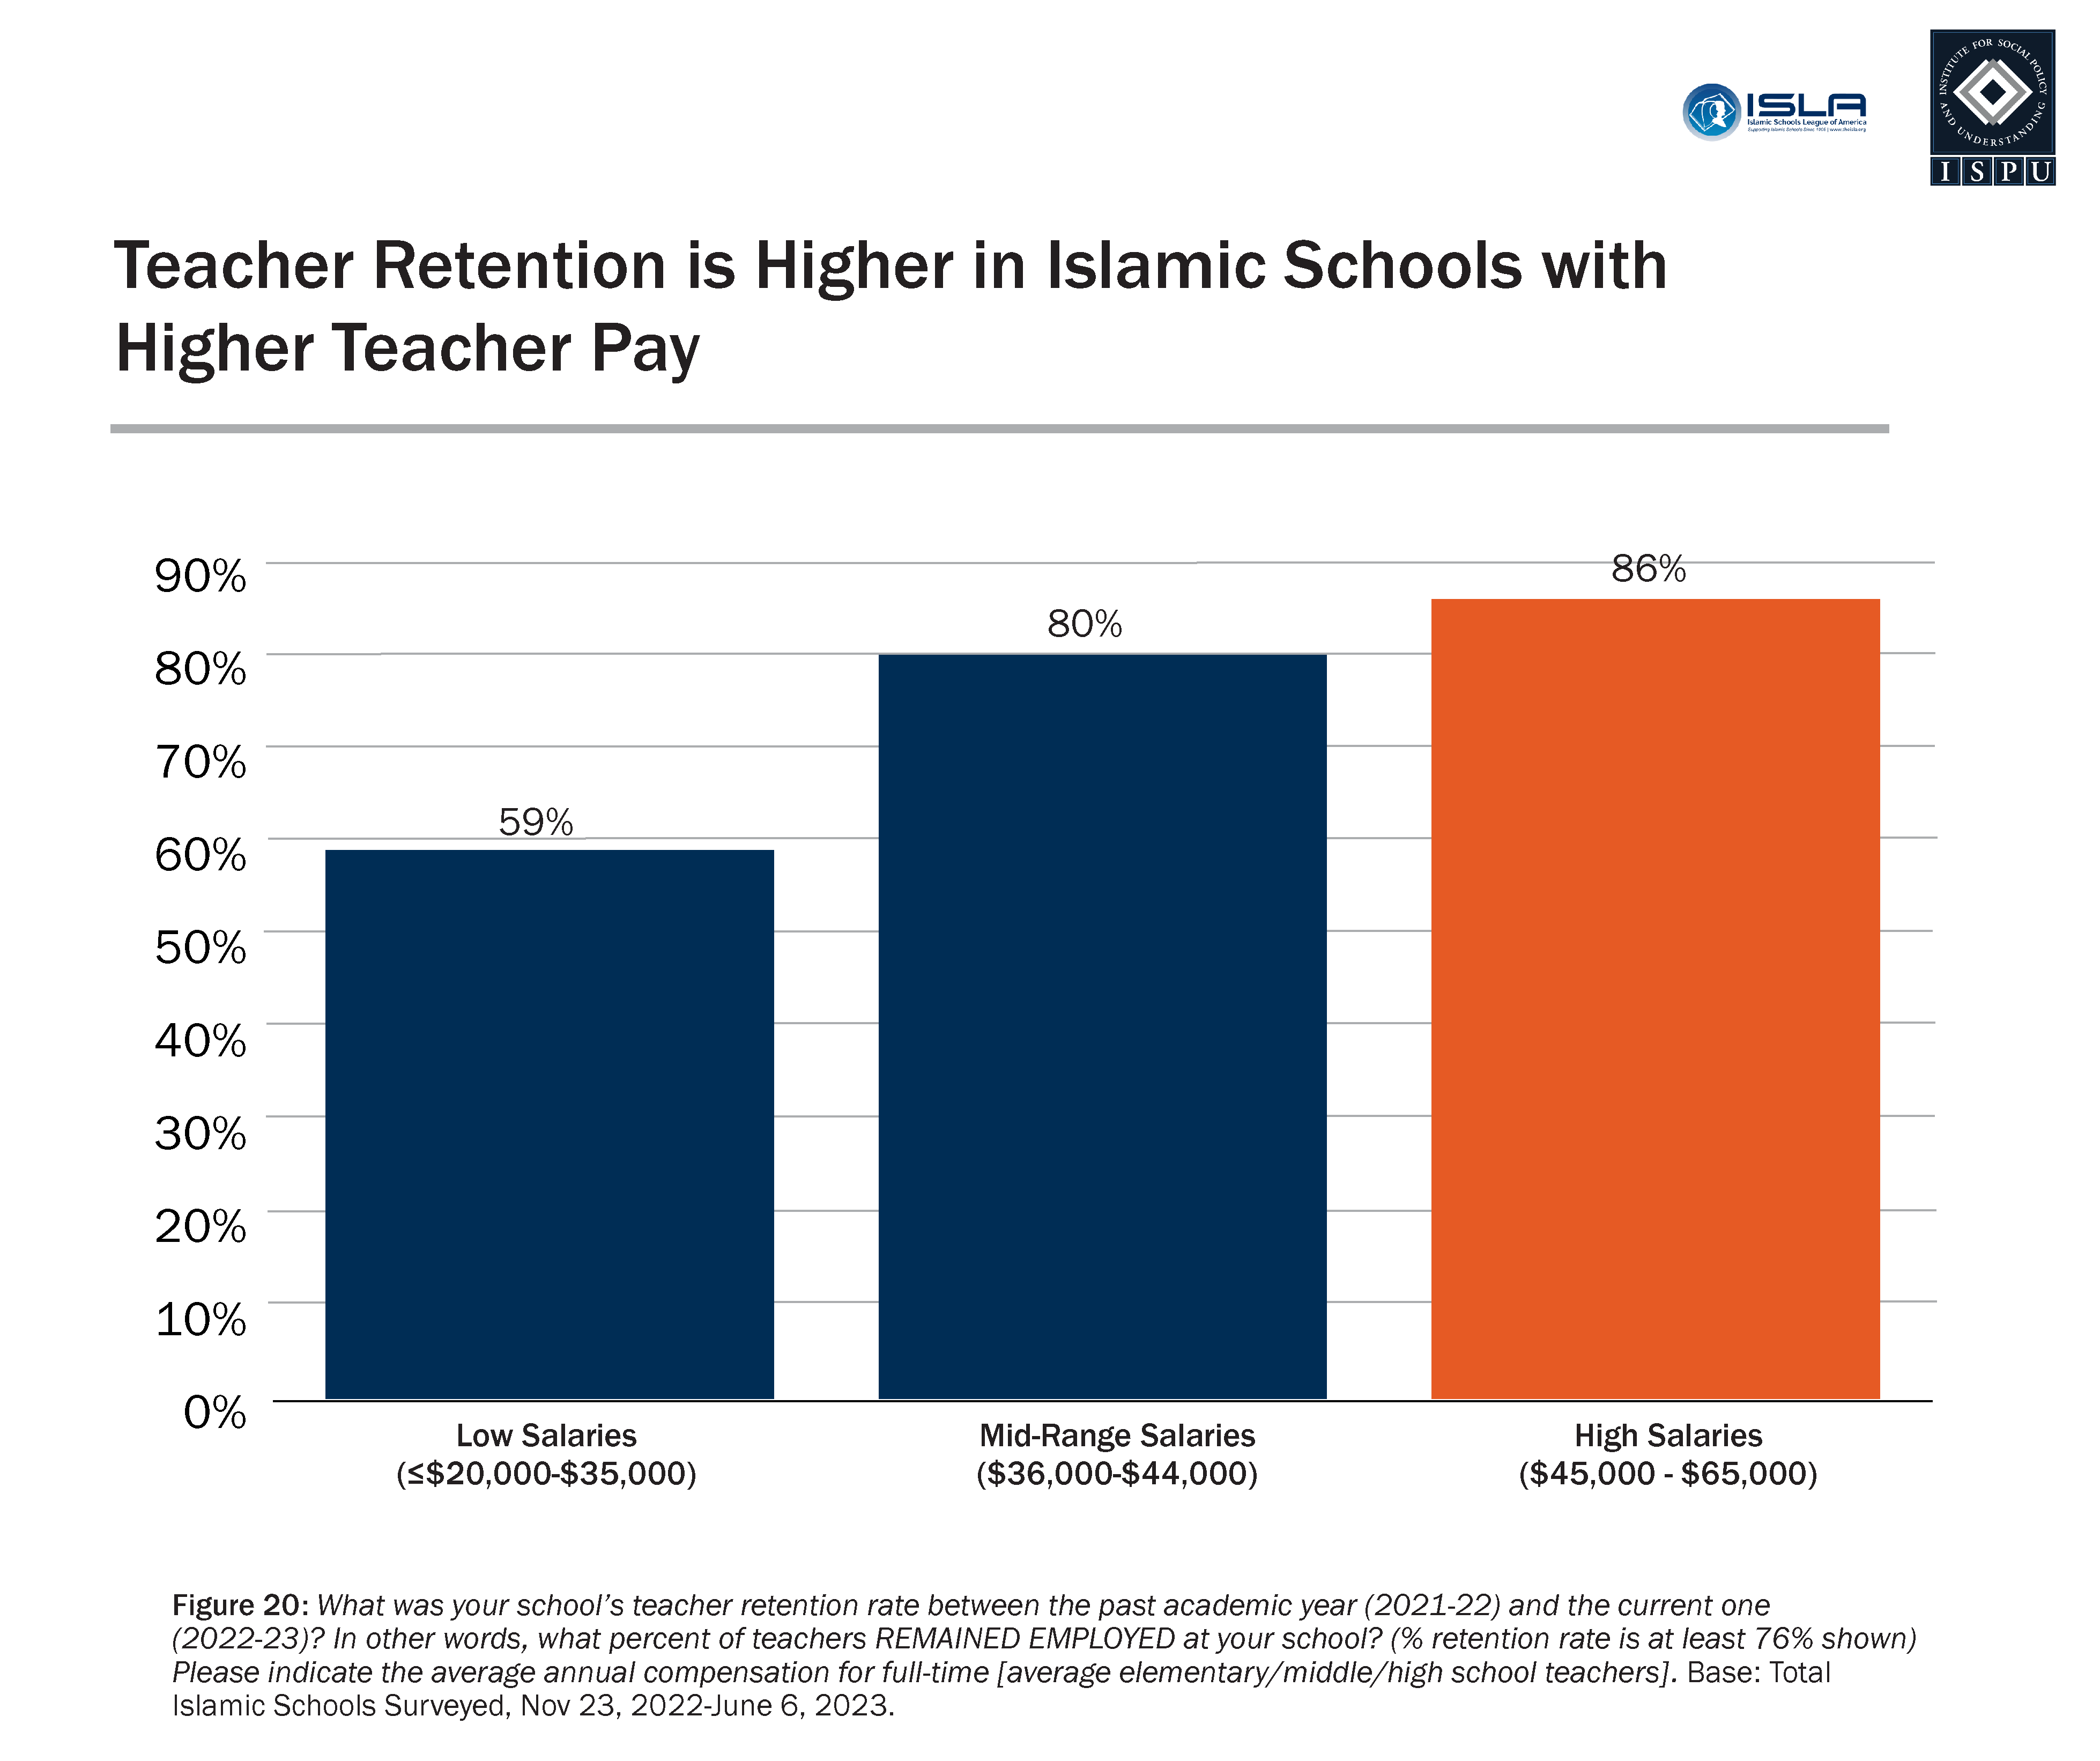 A bar chart showing the relationship between teacher pay and the percentage of schools that have a teacher retention rate between 76% and 100%.